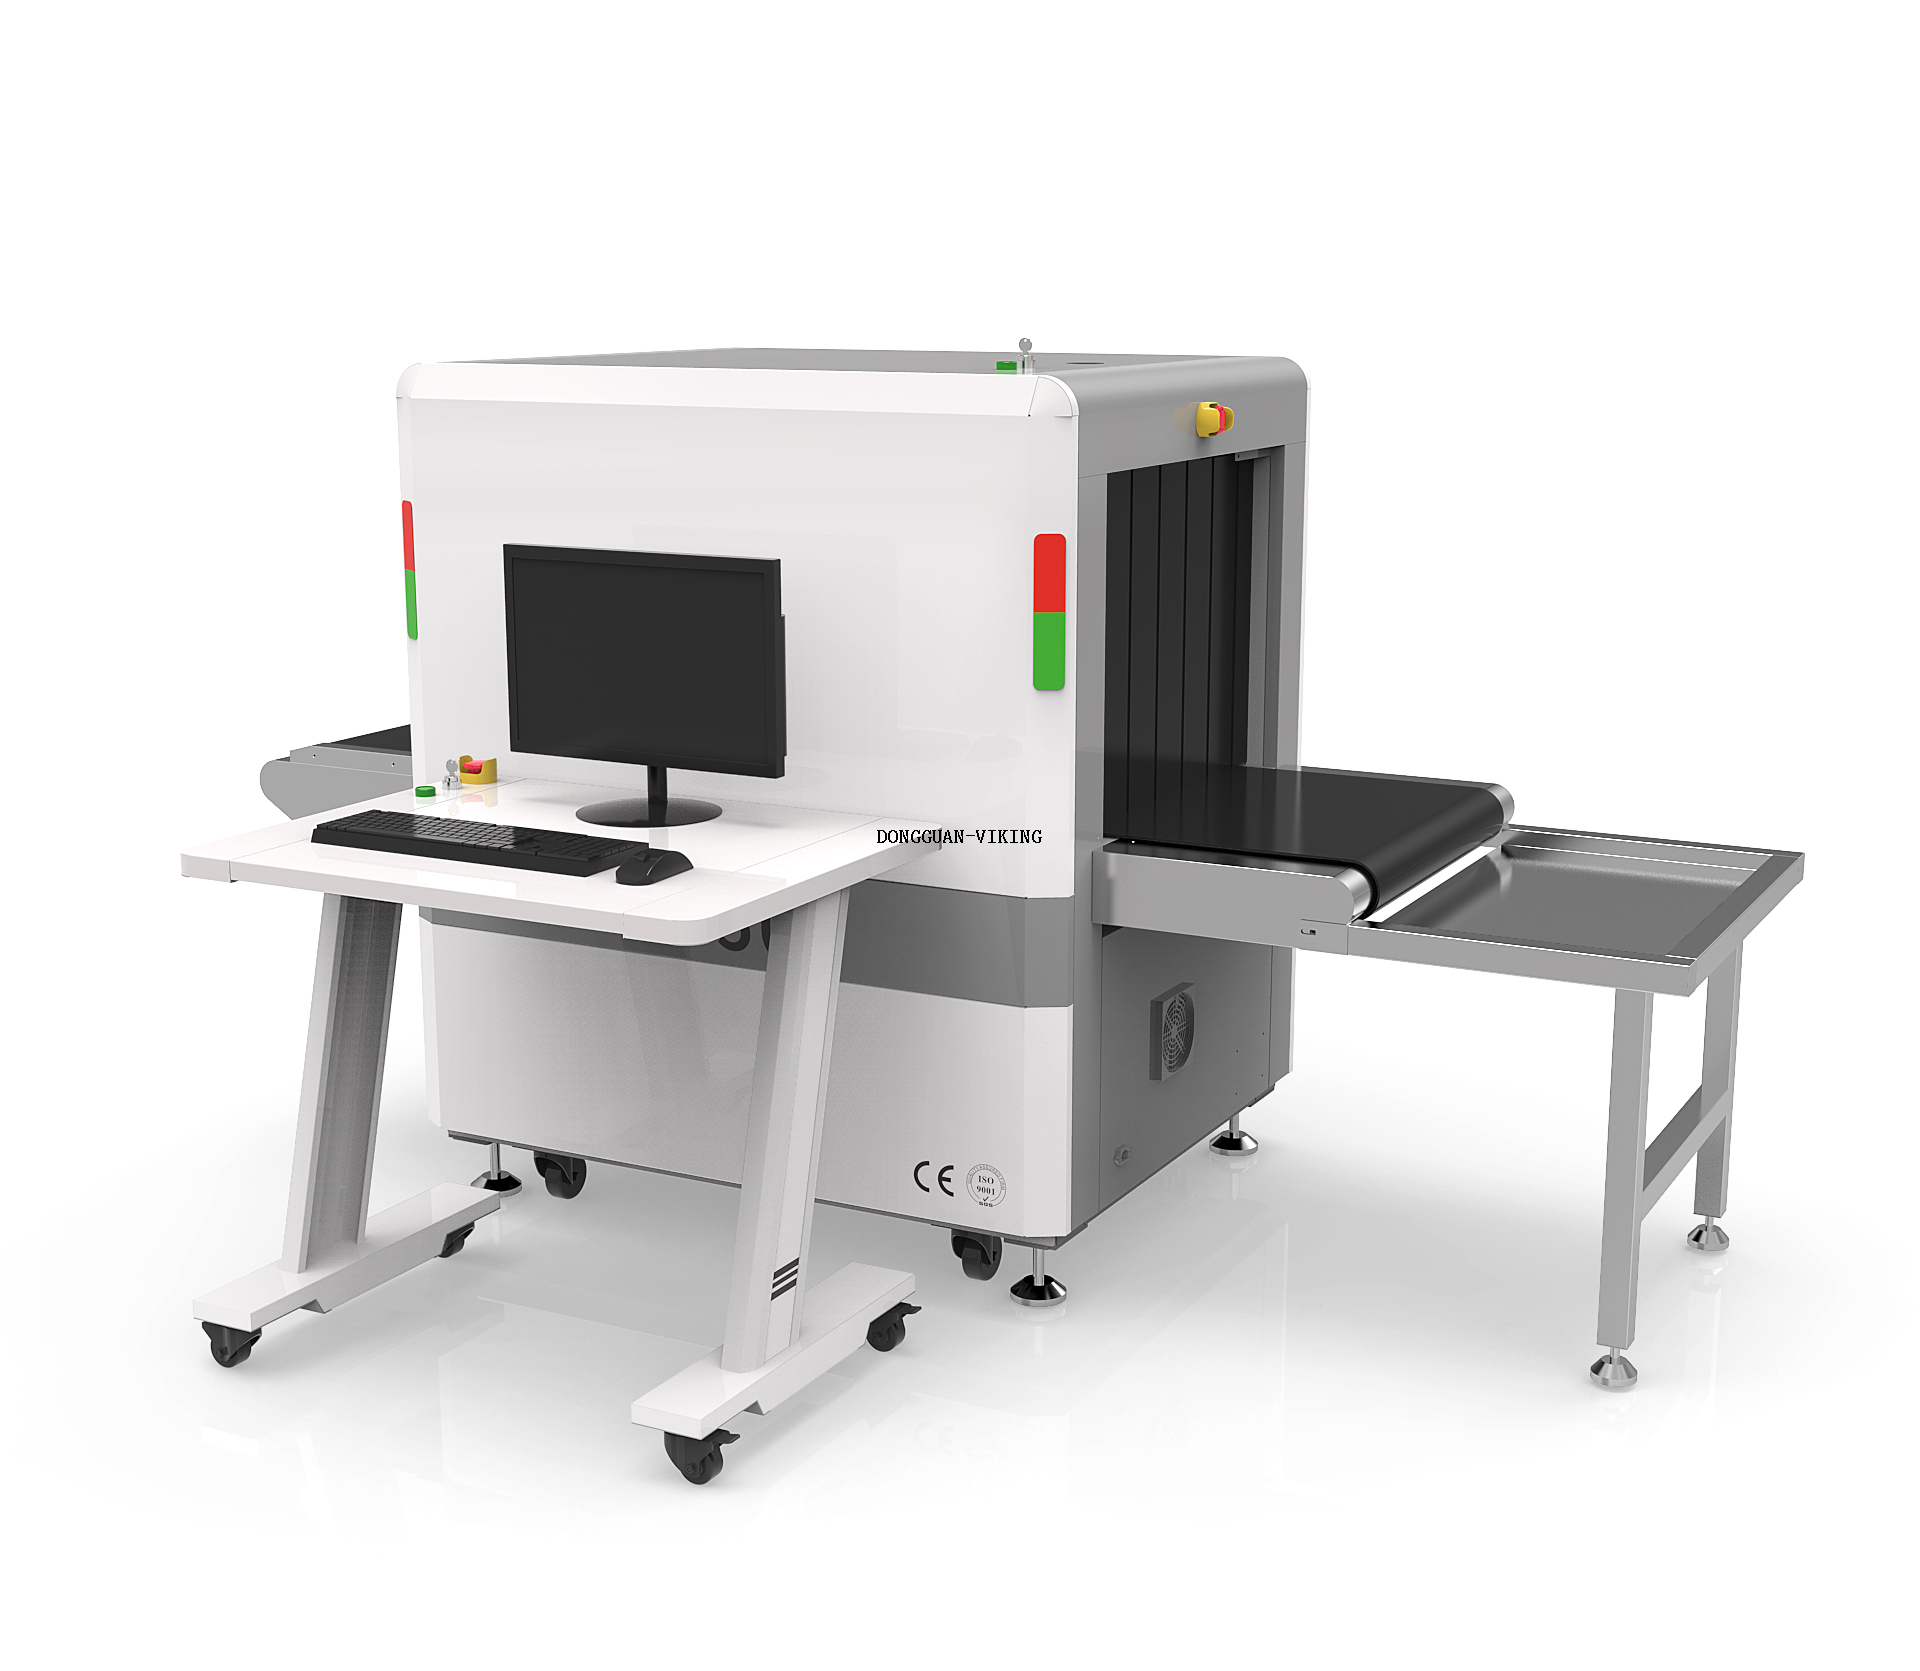 6550A security screening scanner airport xray machine